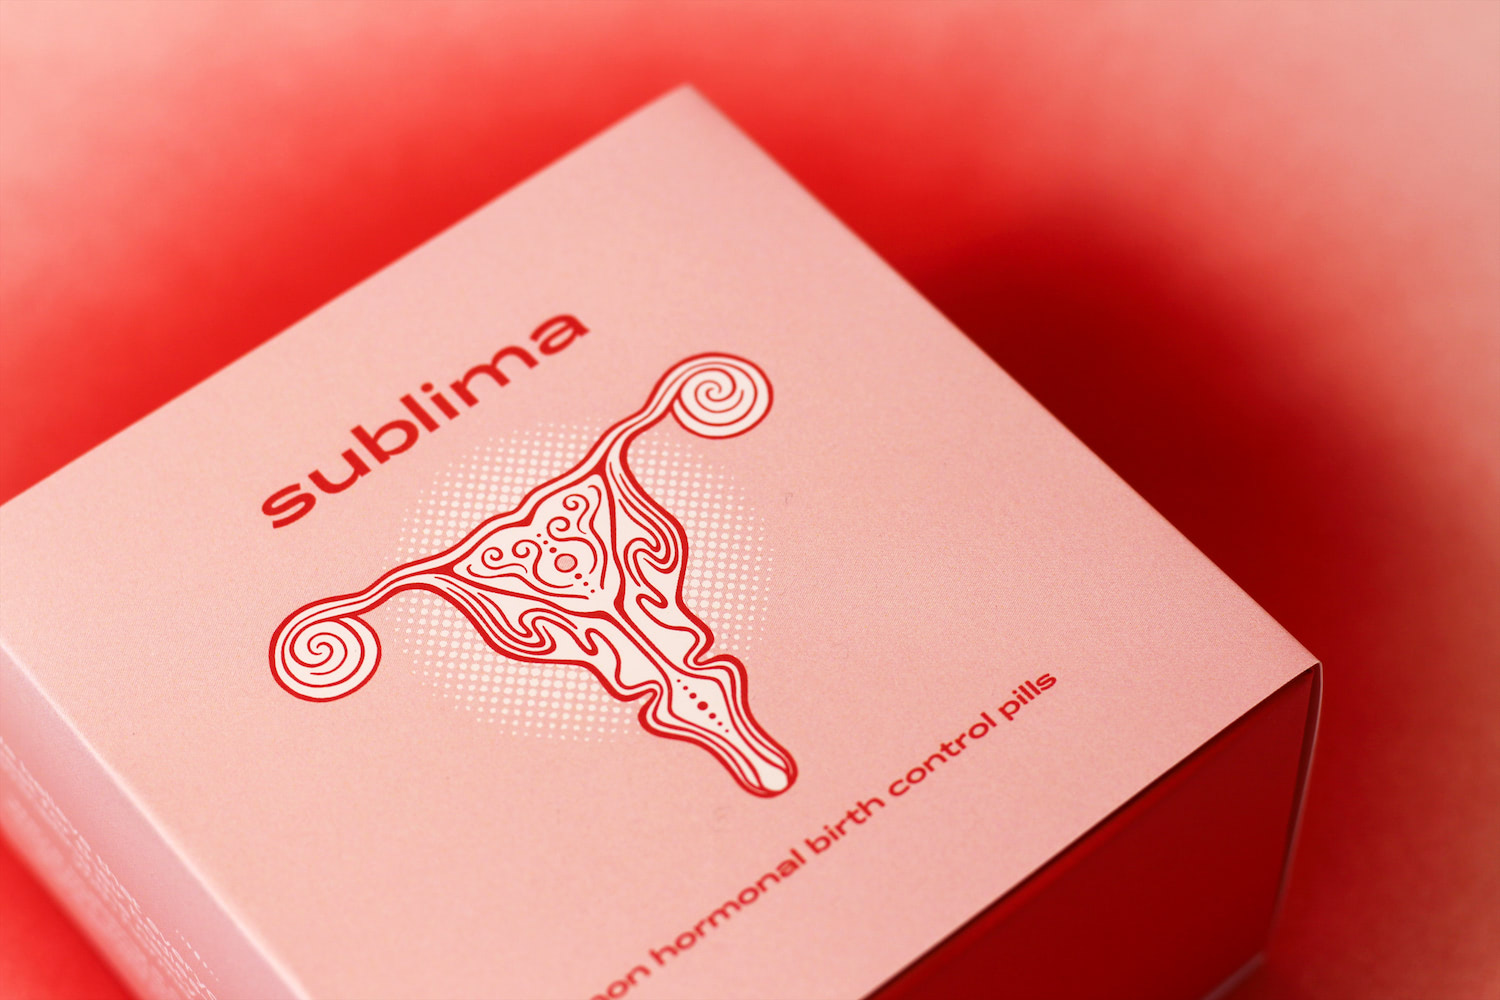 A close-up photo of Sublima's uterus logo on the front of the packaging box. The box is placed on a spray-painted red backdrop.